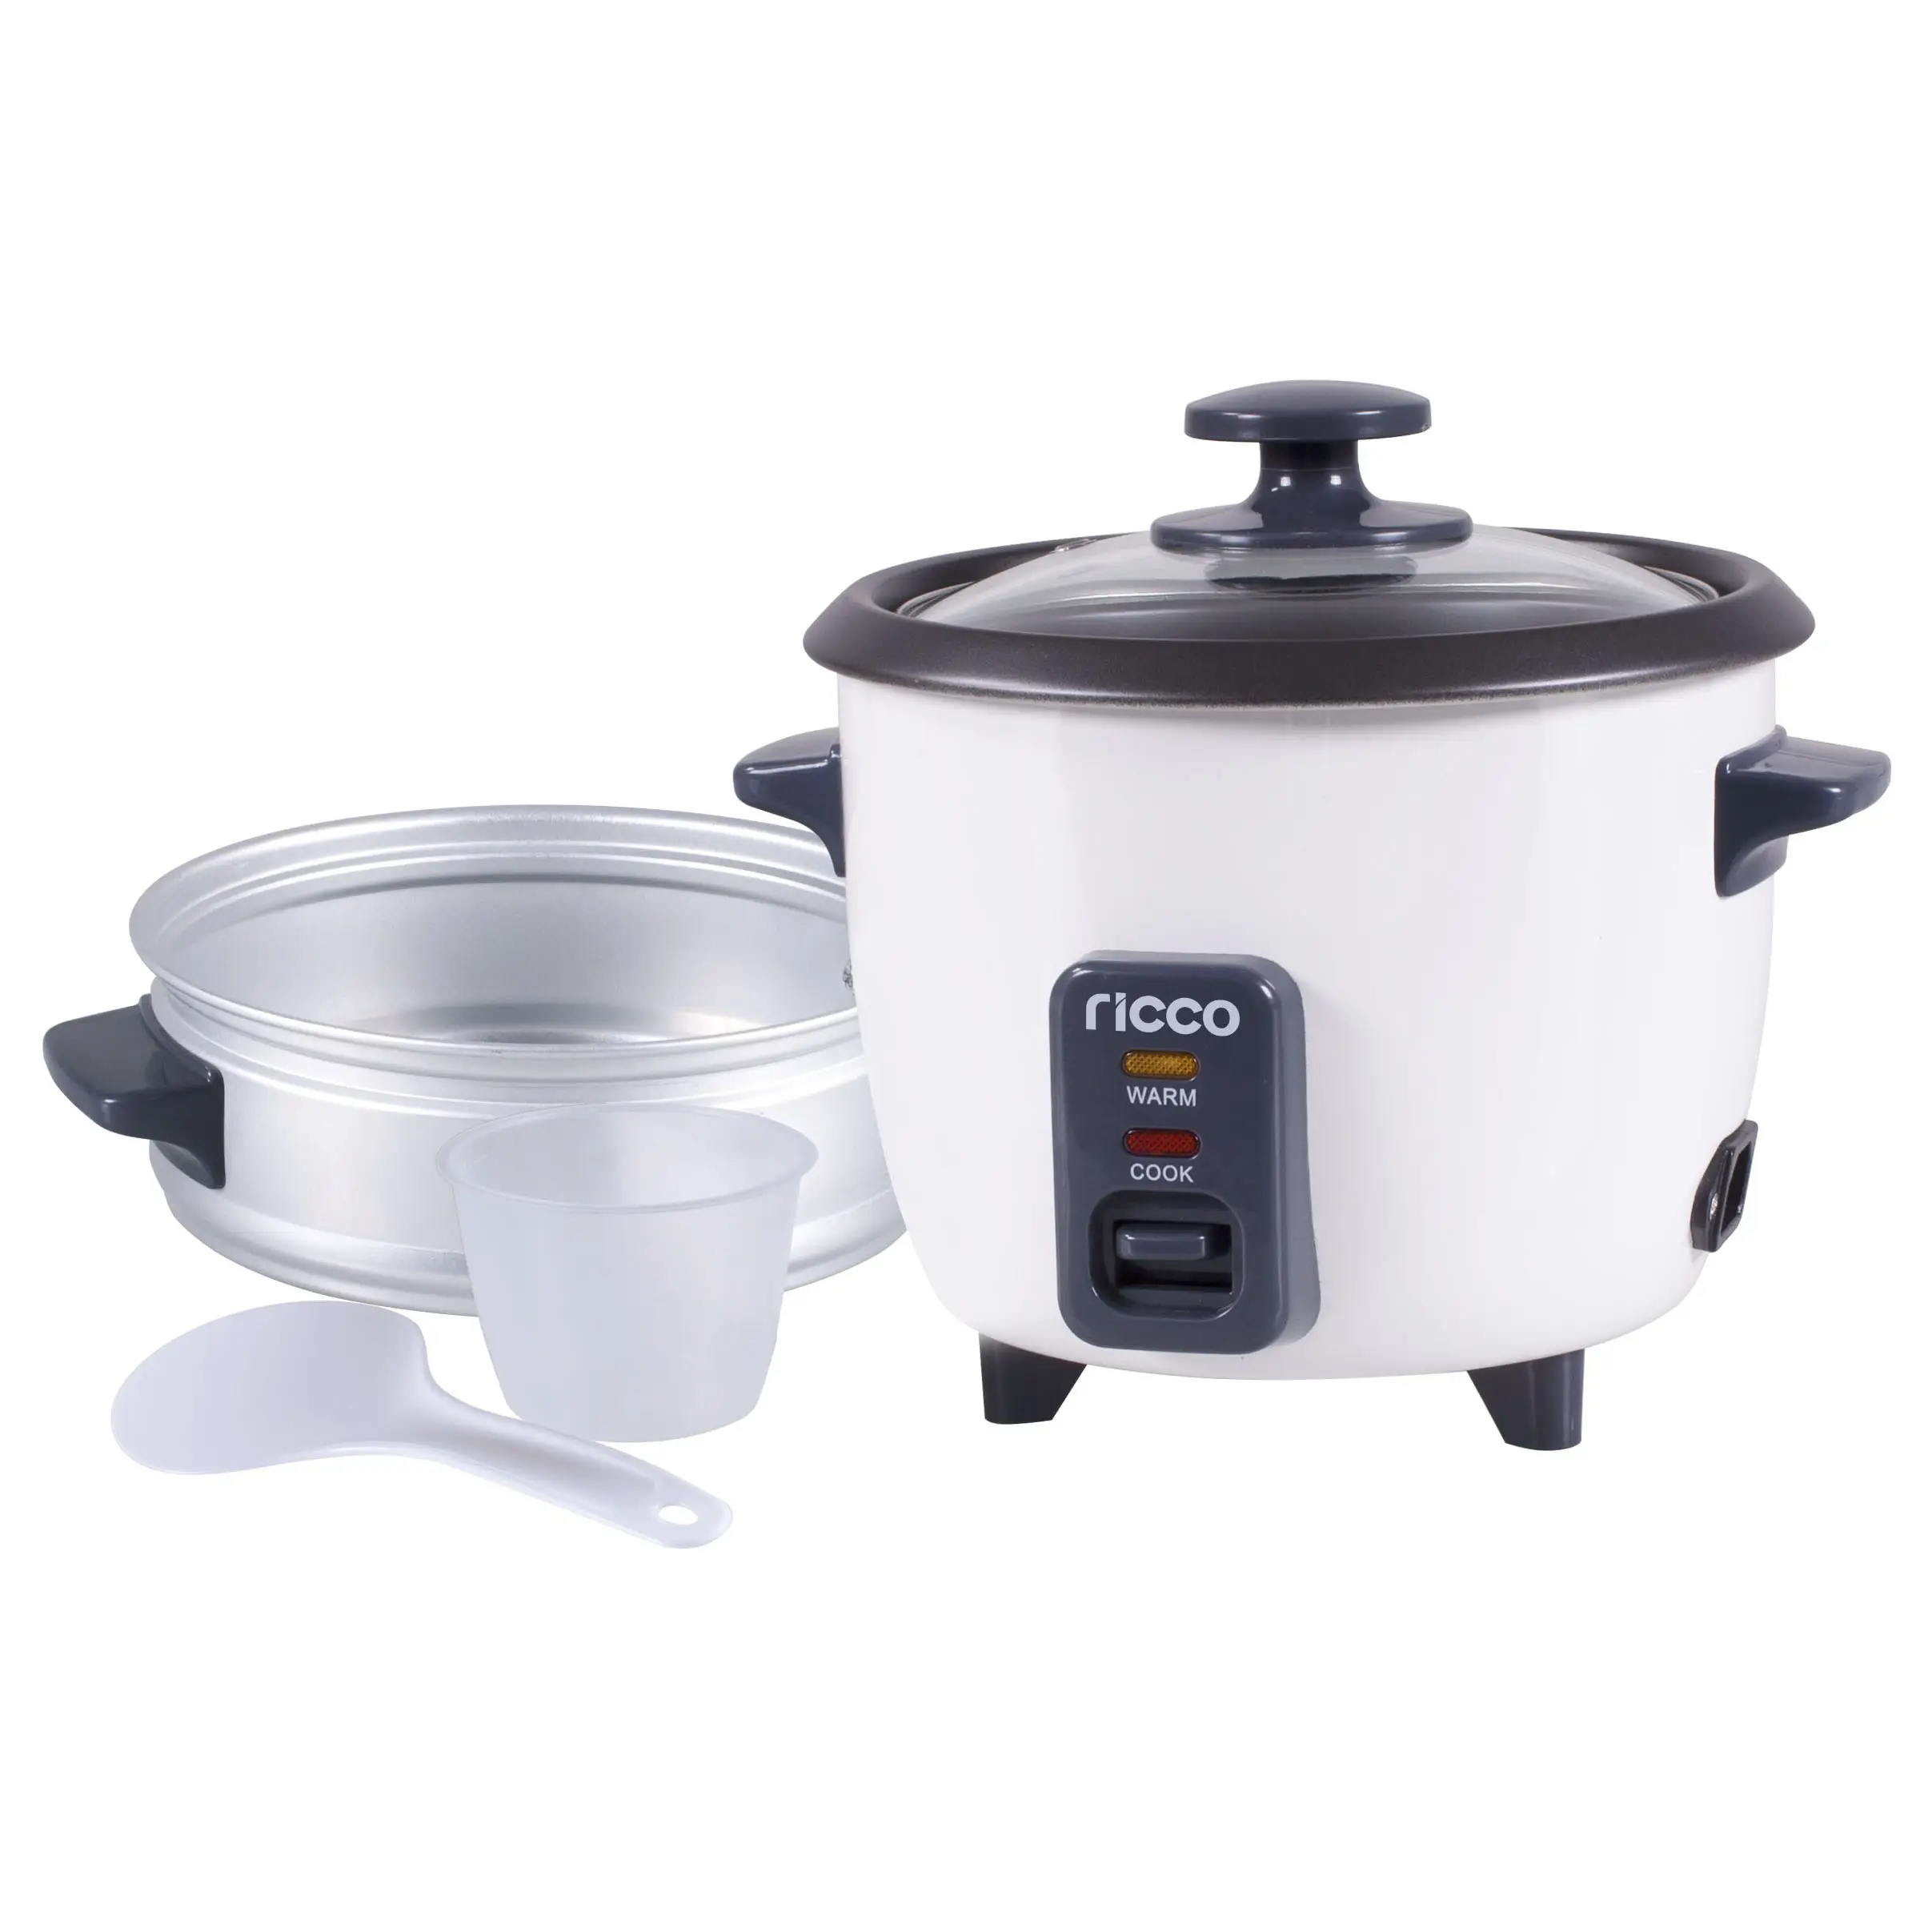 0.6Liter 3 cup rice cooker with steamer